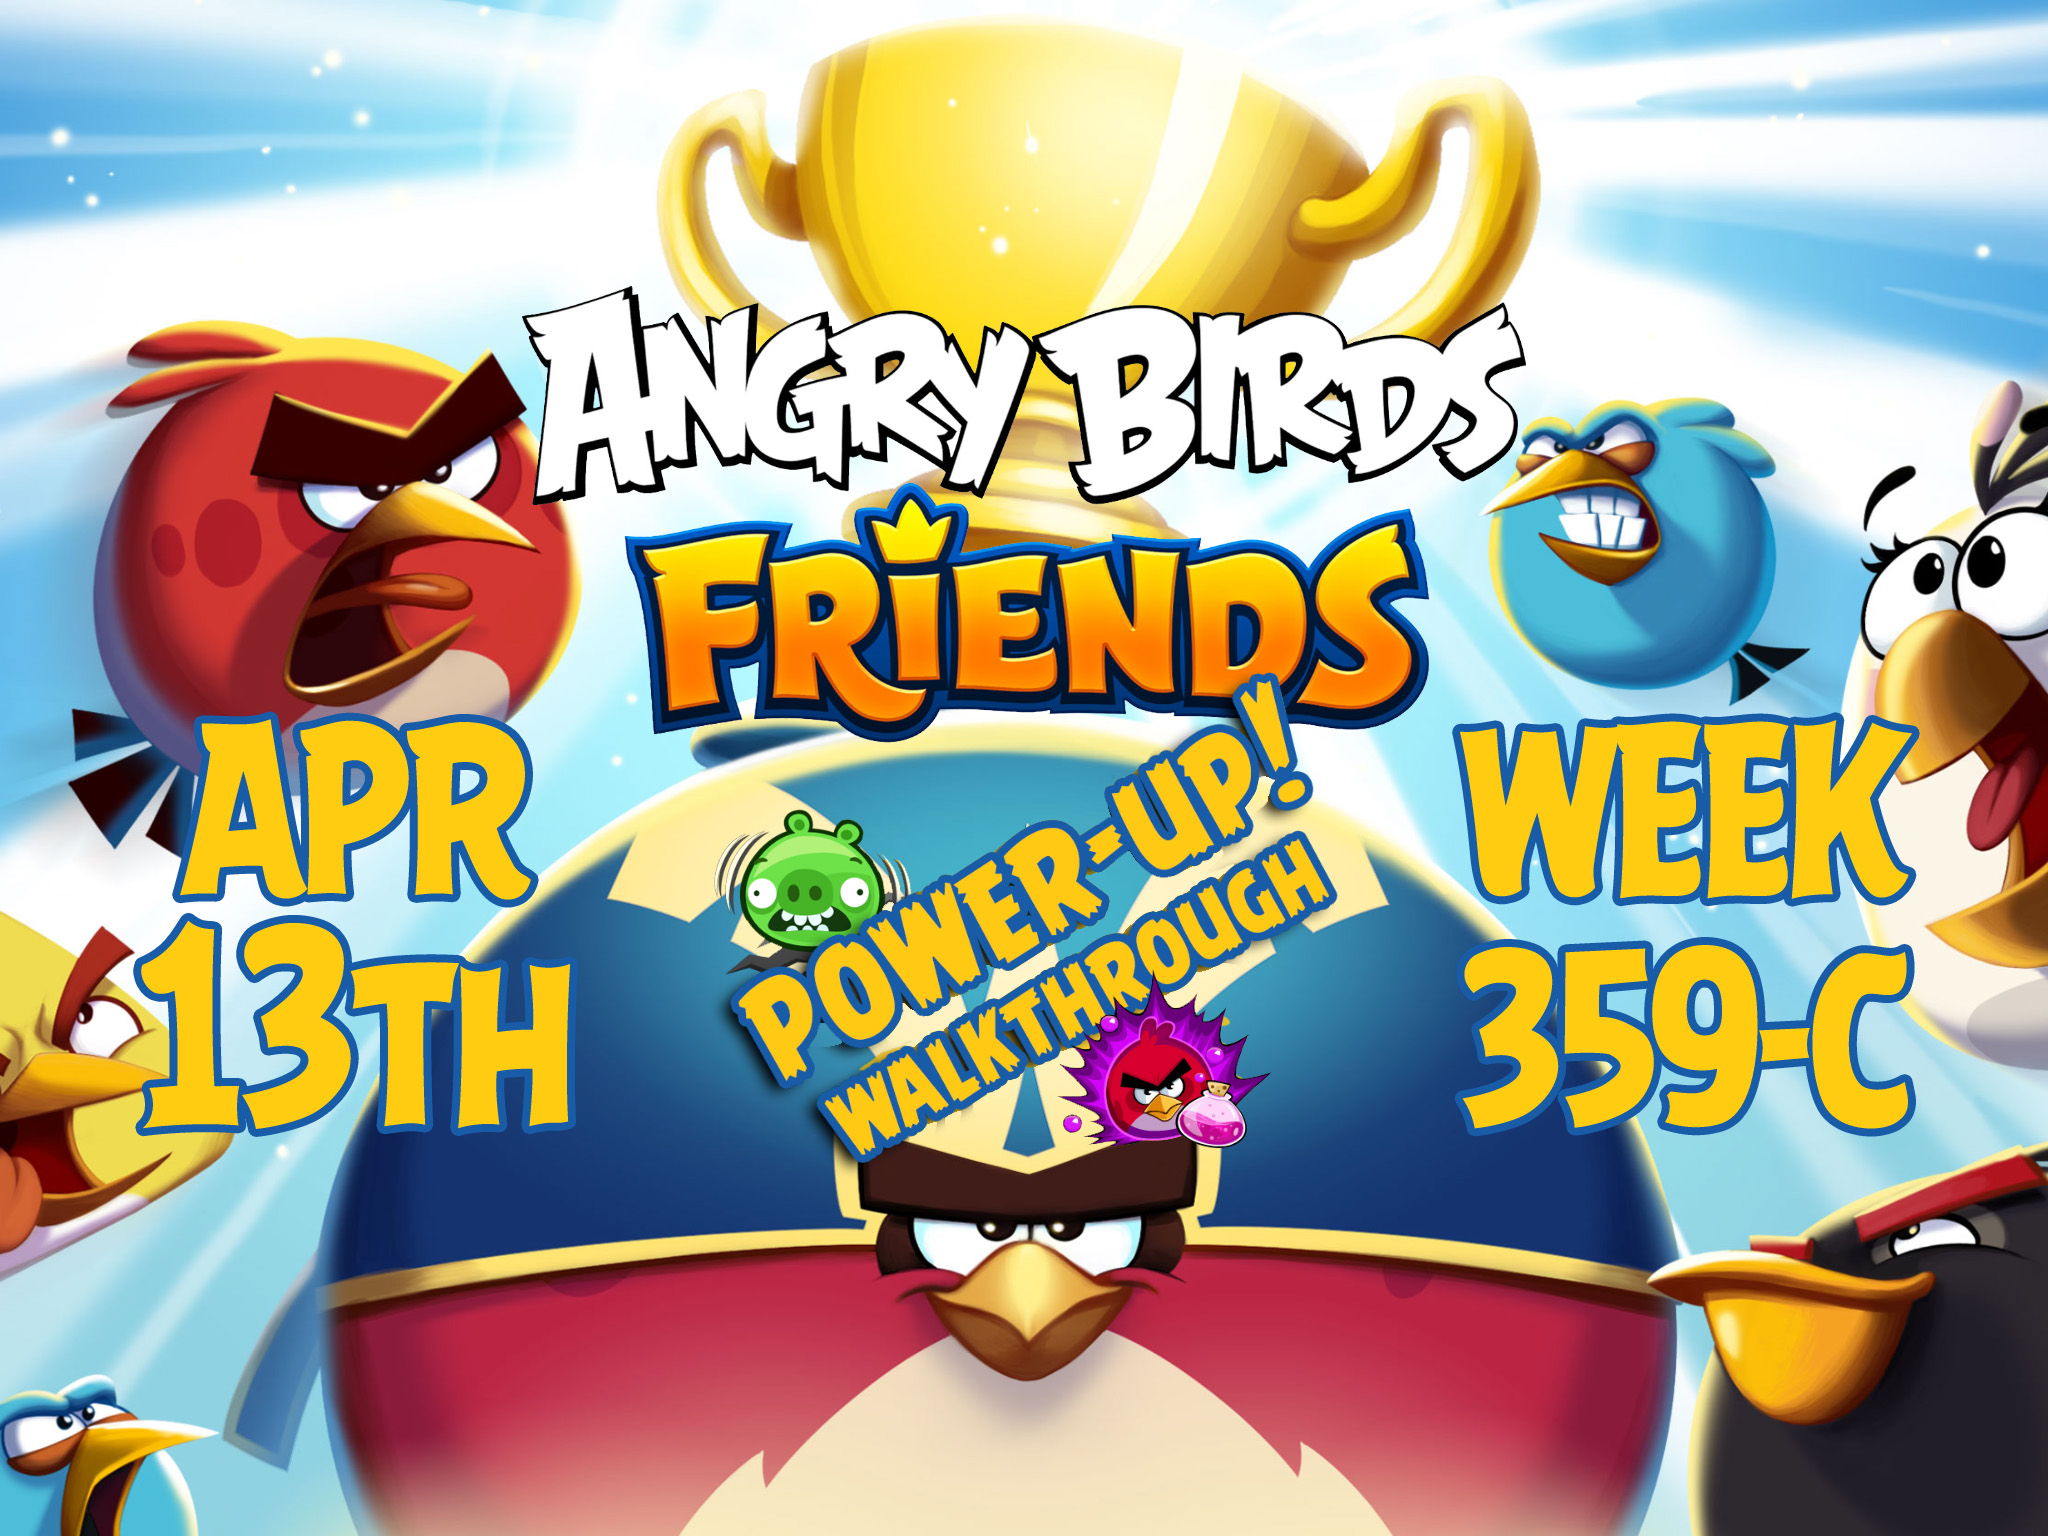 Angry-Birds-Friends-Tournament-Week-359-C-Feature-Image-PU